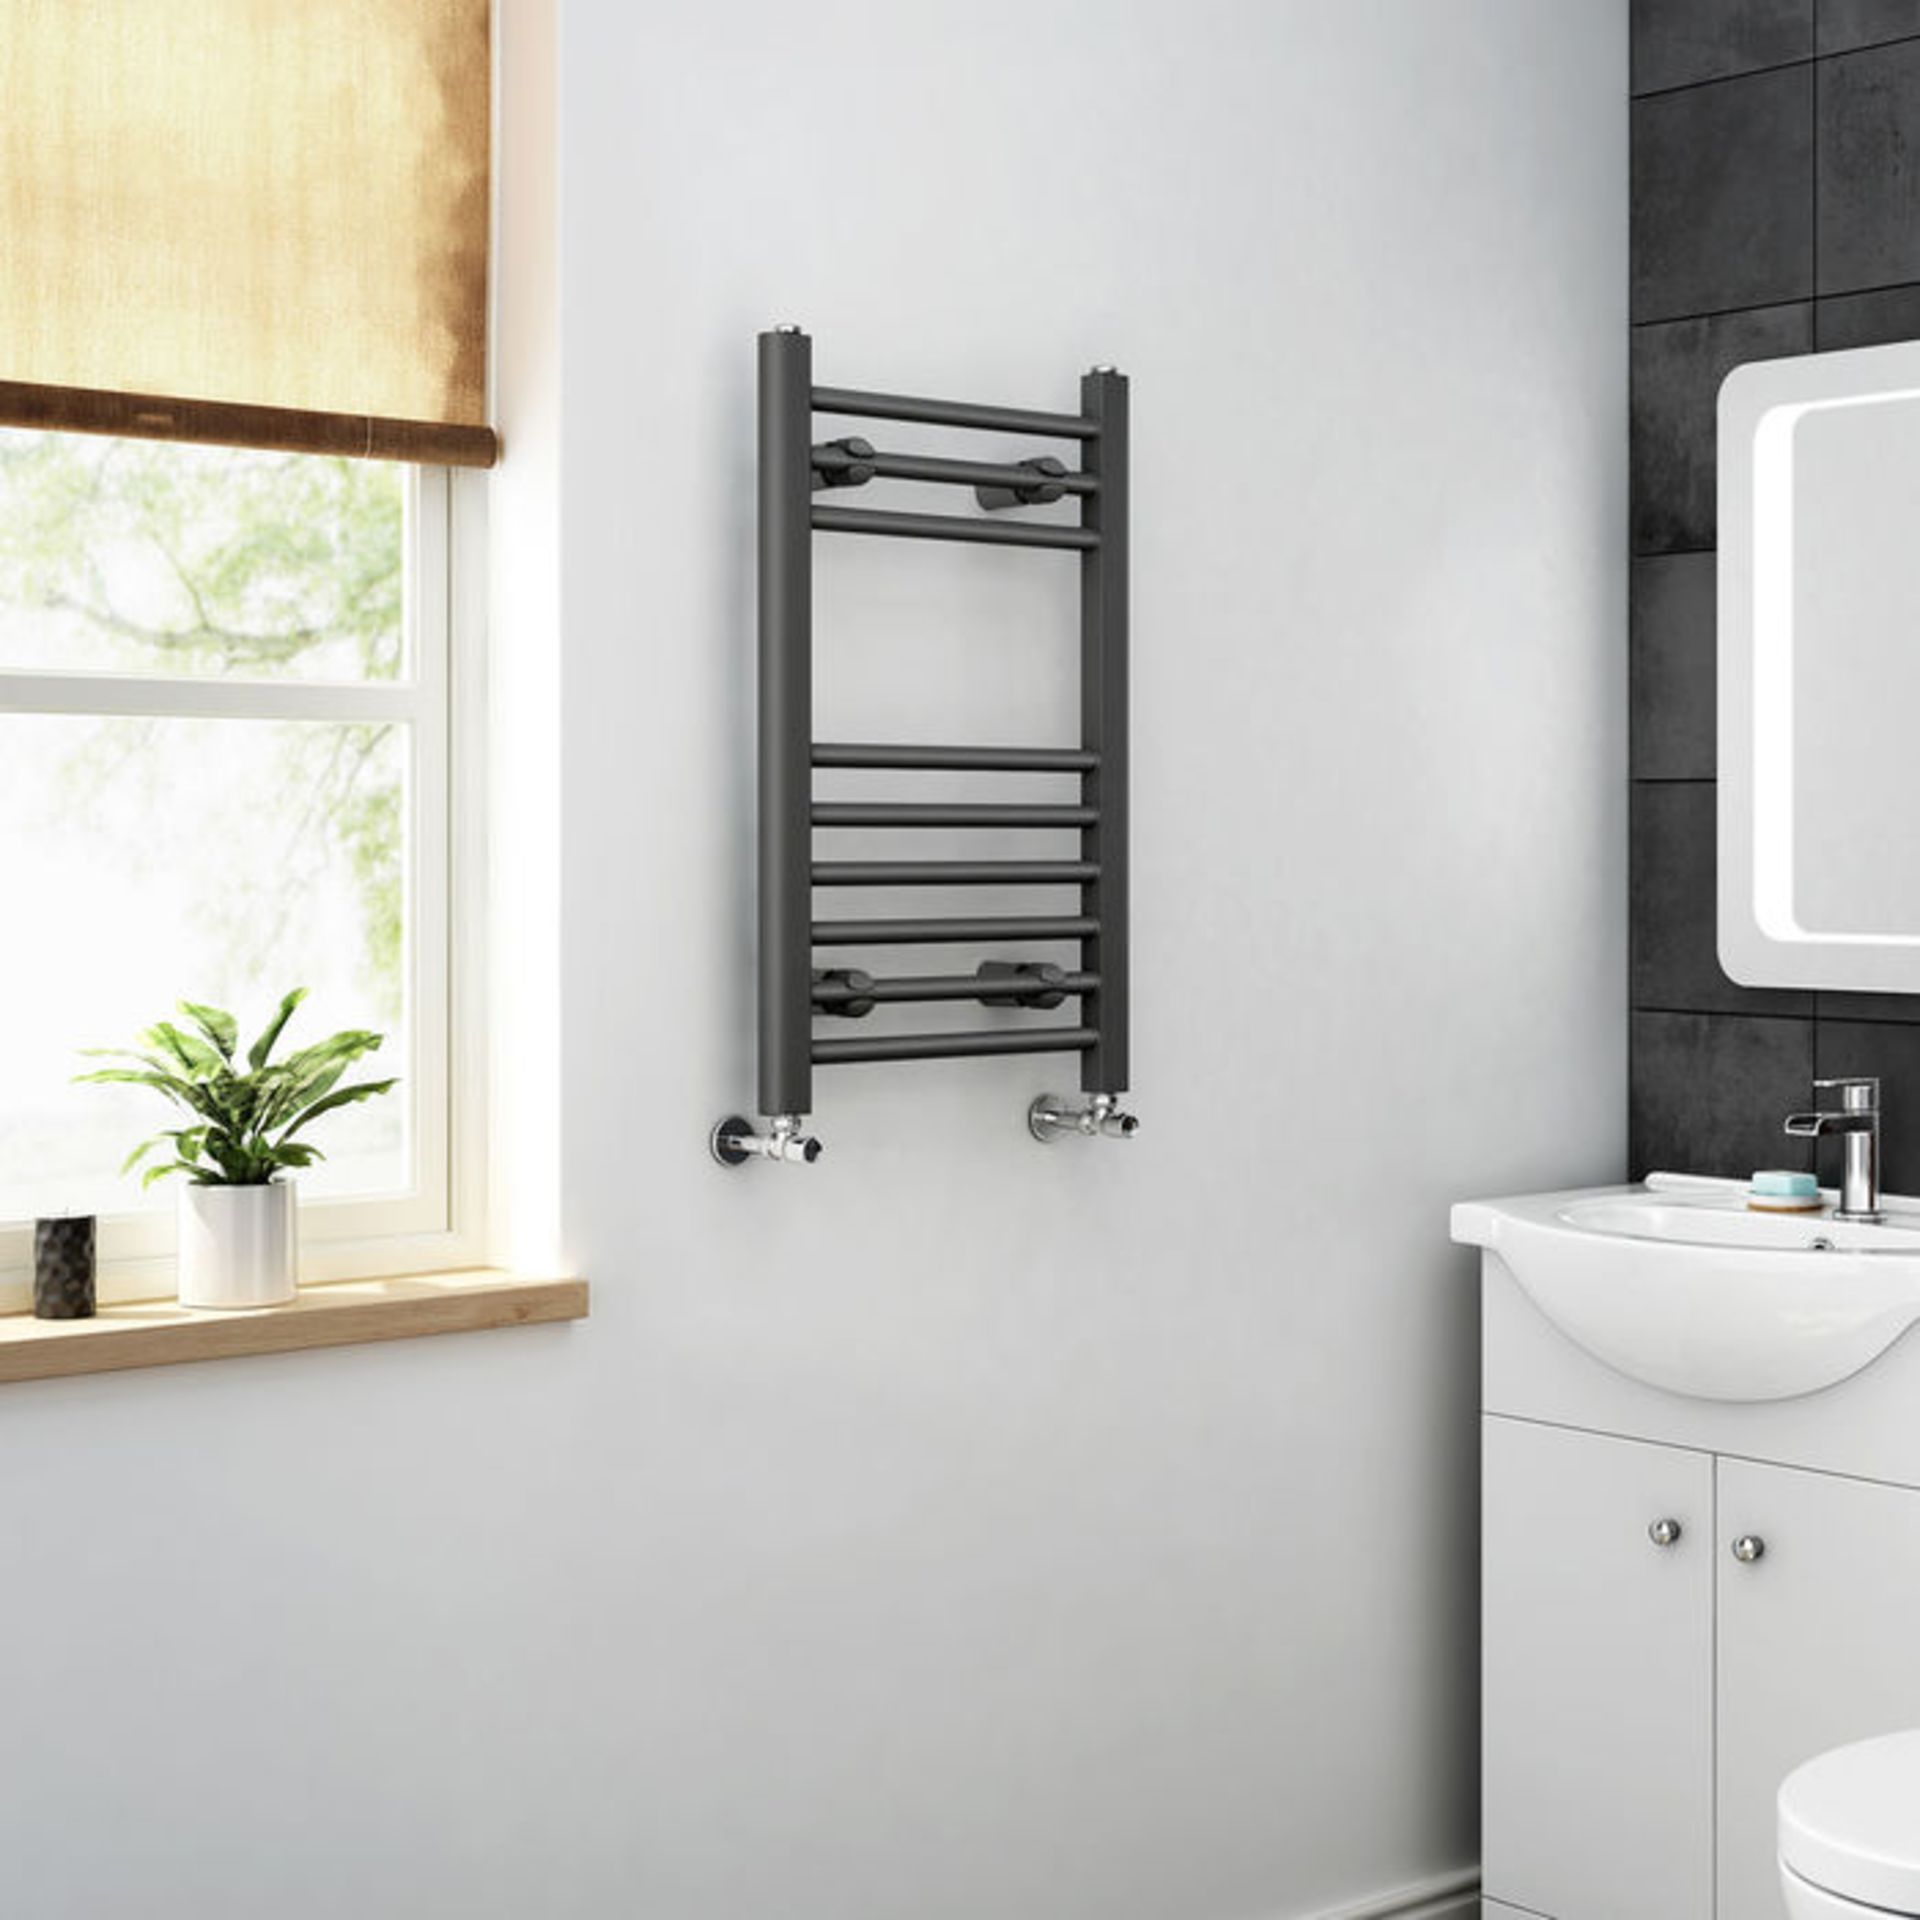 (P111) 650x400mm - 20mm Tubes - Anthracite Heated Straight Rail Ladder Towel Radiator. Corrosion - Image 2 of 2